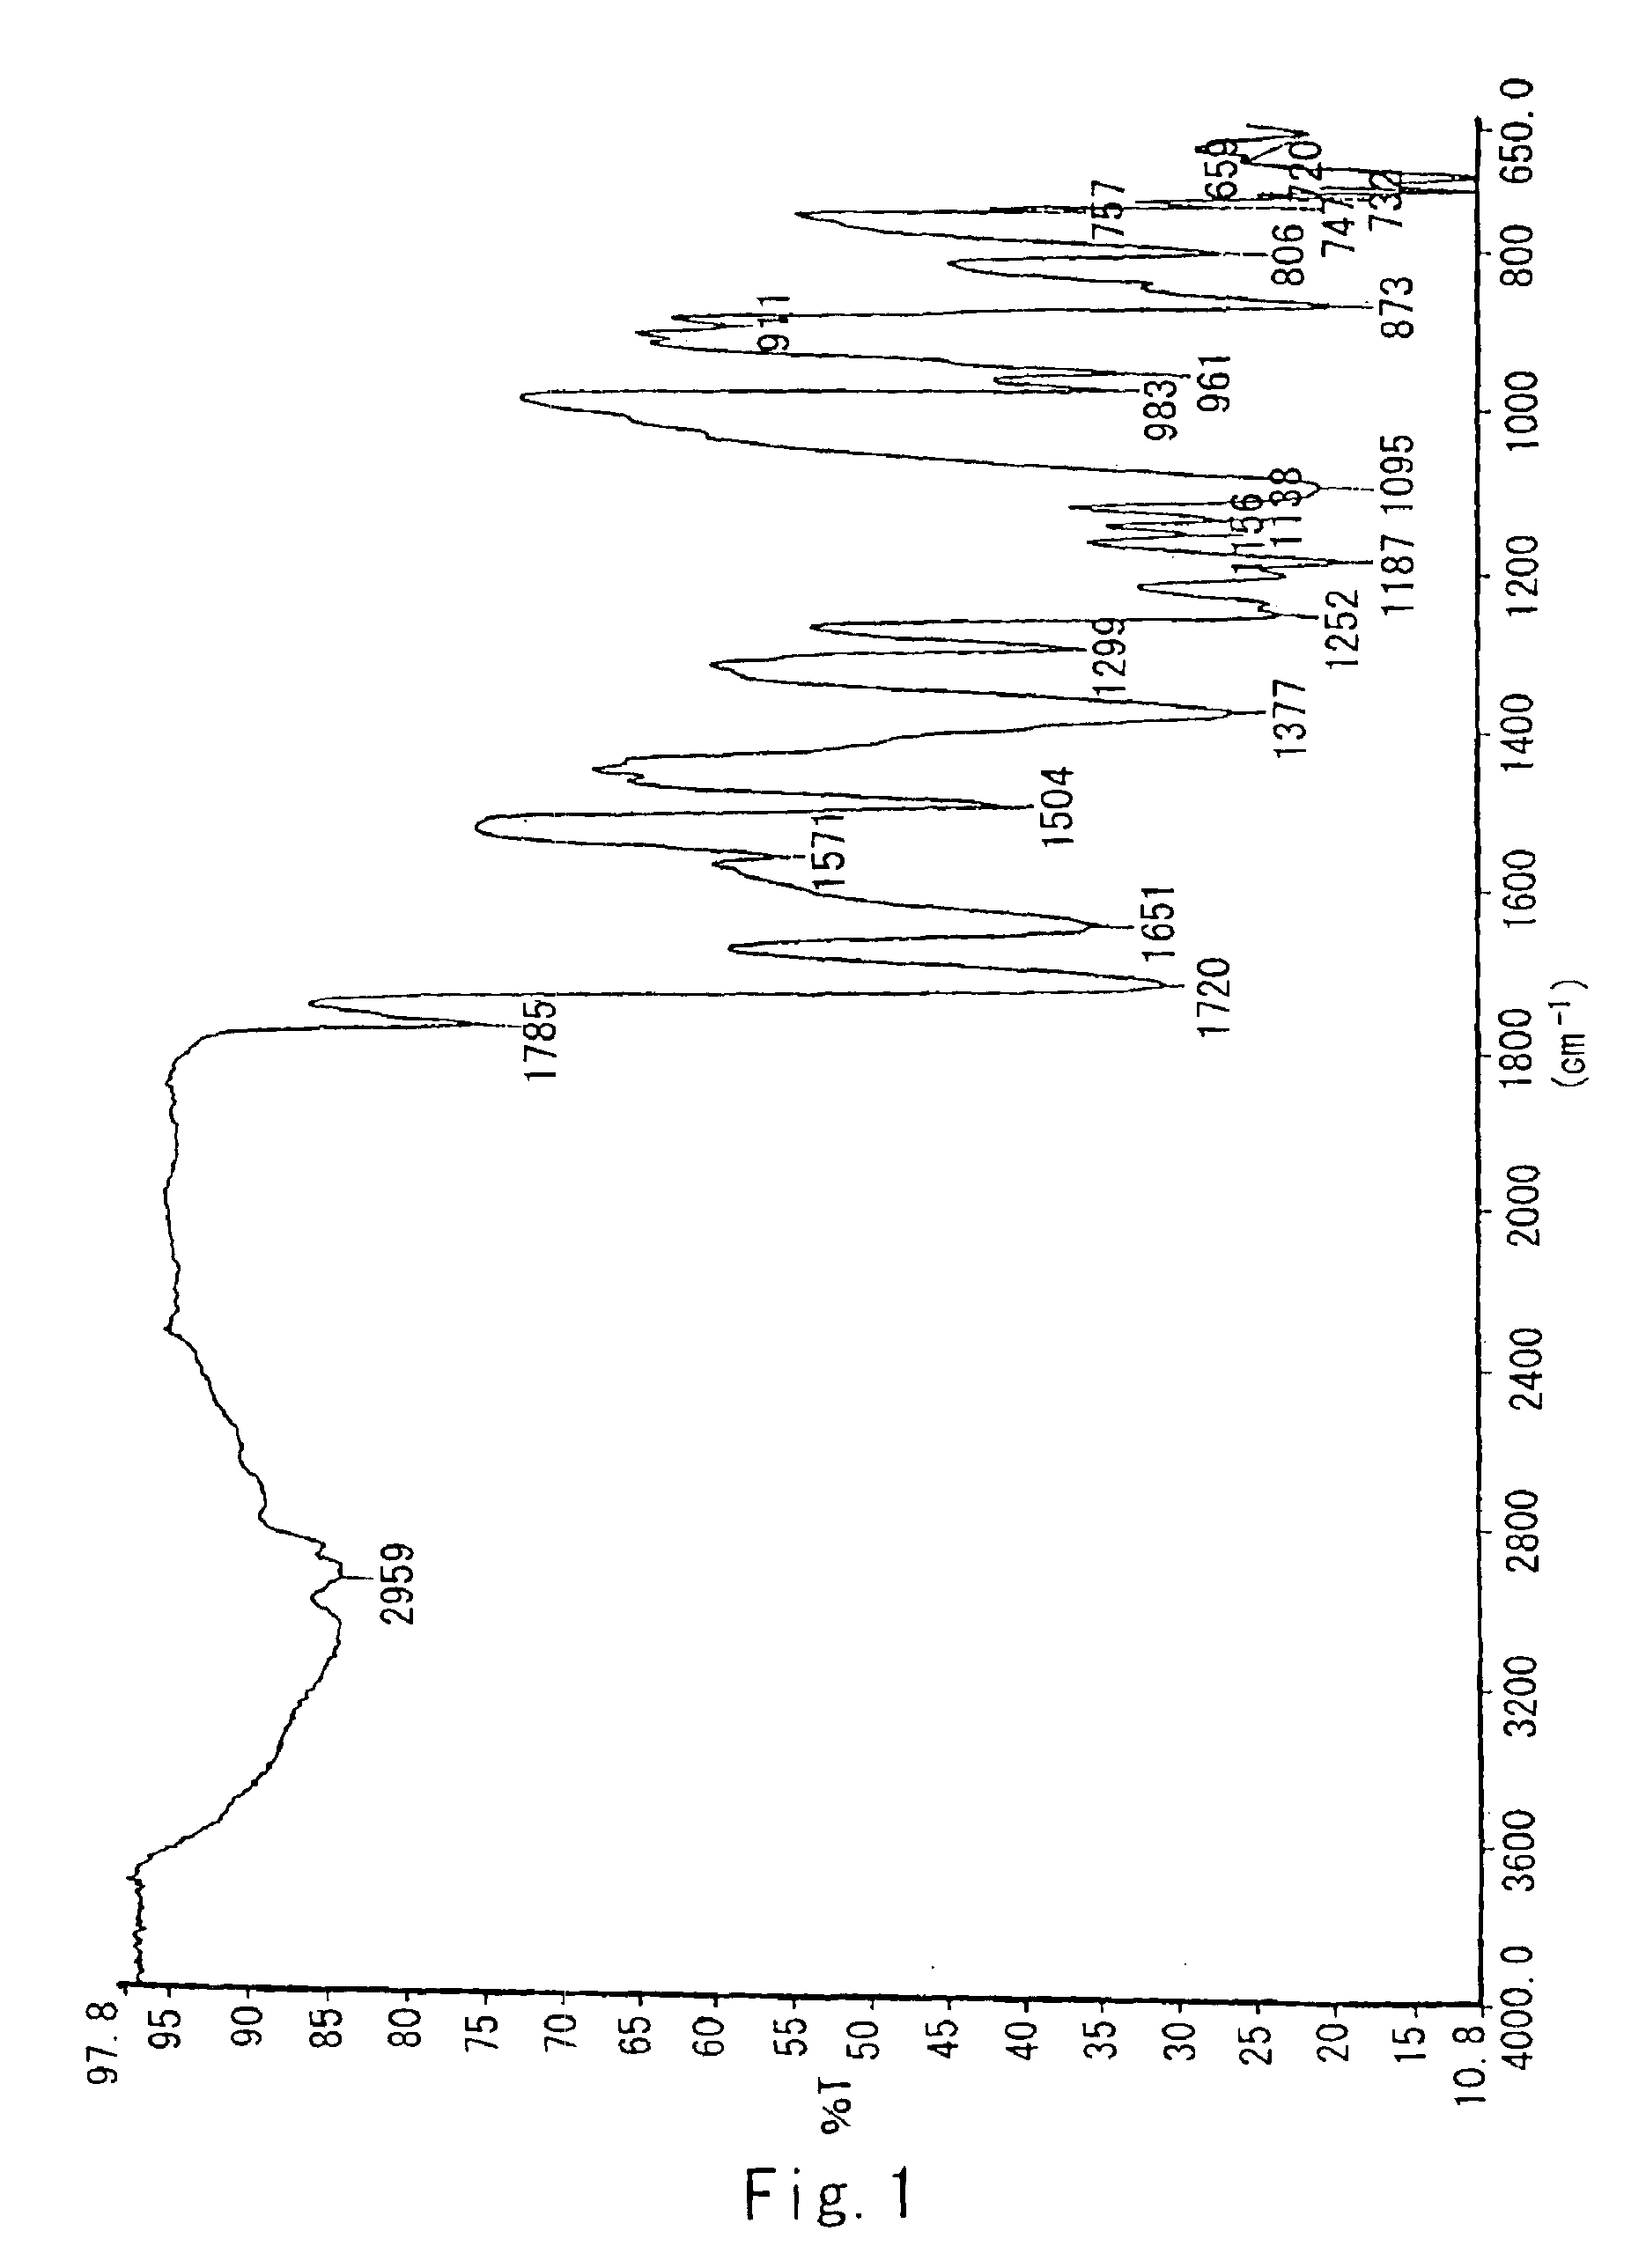 Imide-benzoxazole polycondensate and process for producing the same